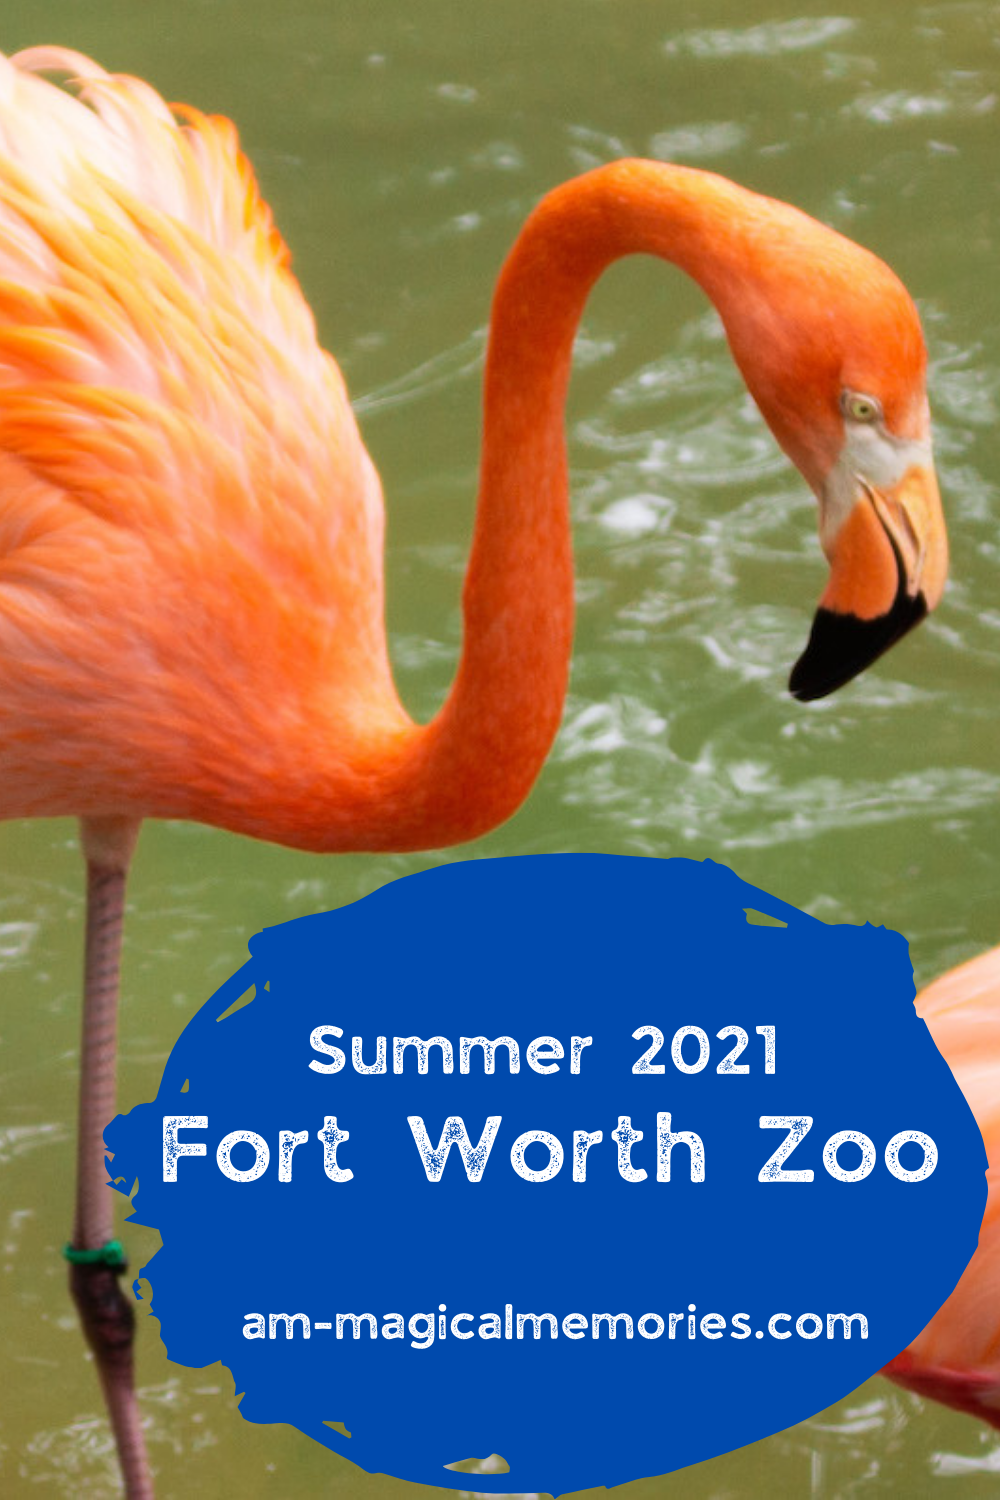 Fort Worth Zoo Summer 2021 A.M. Magical Memories